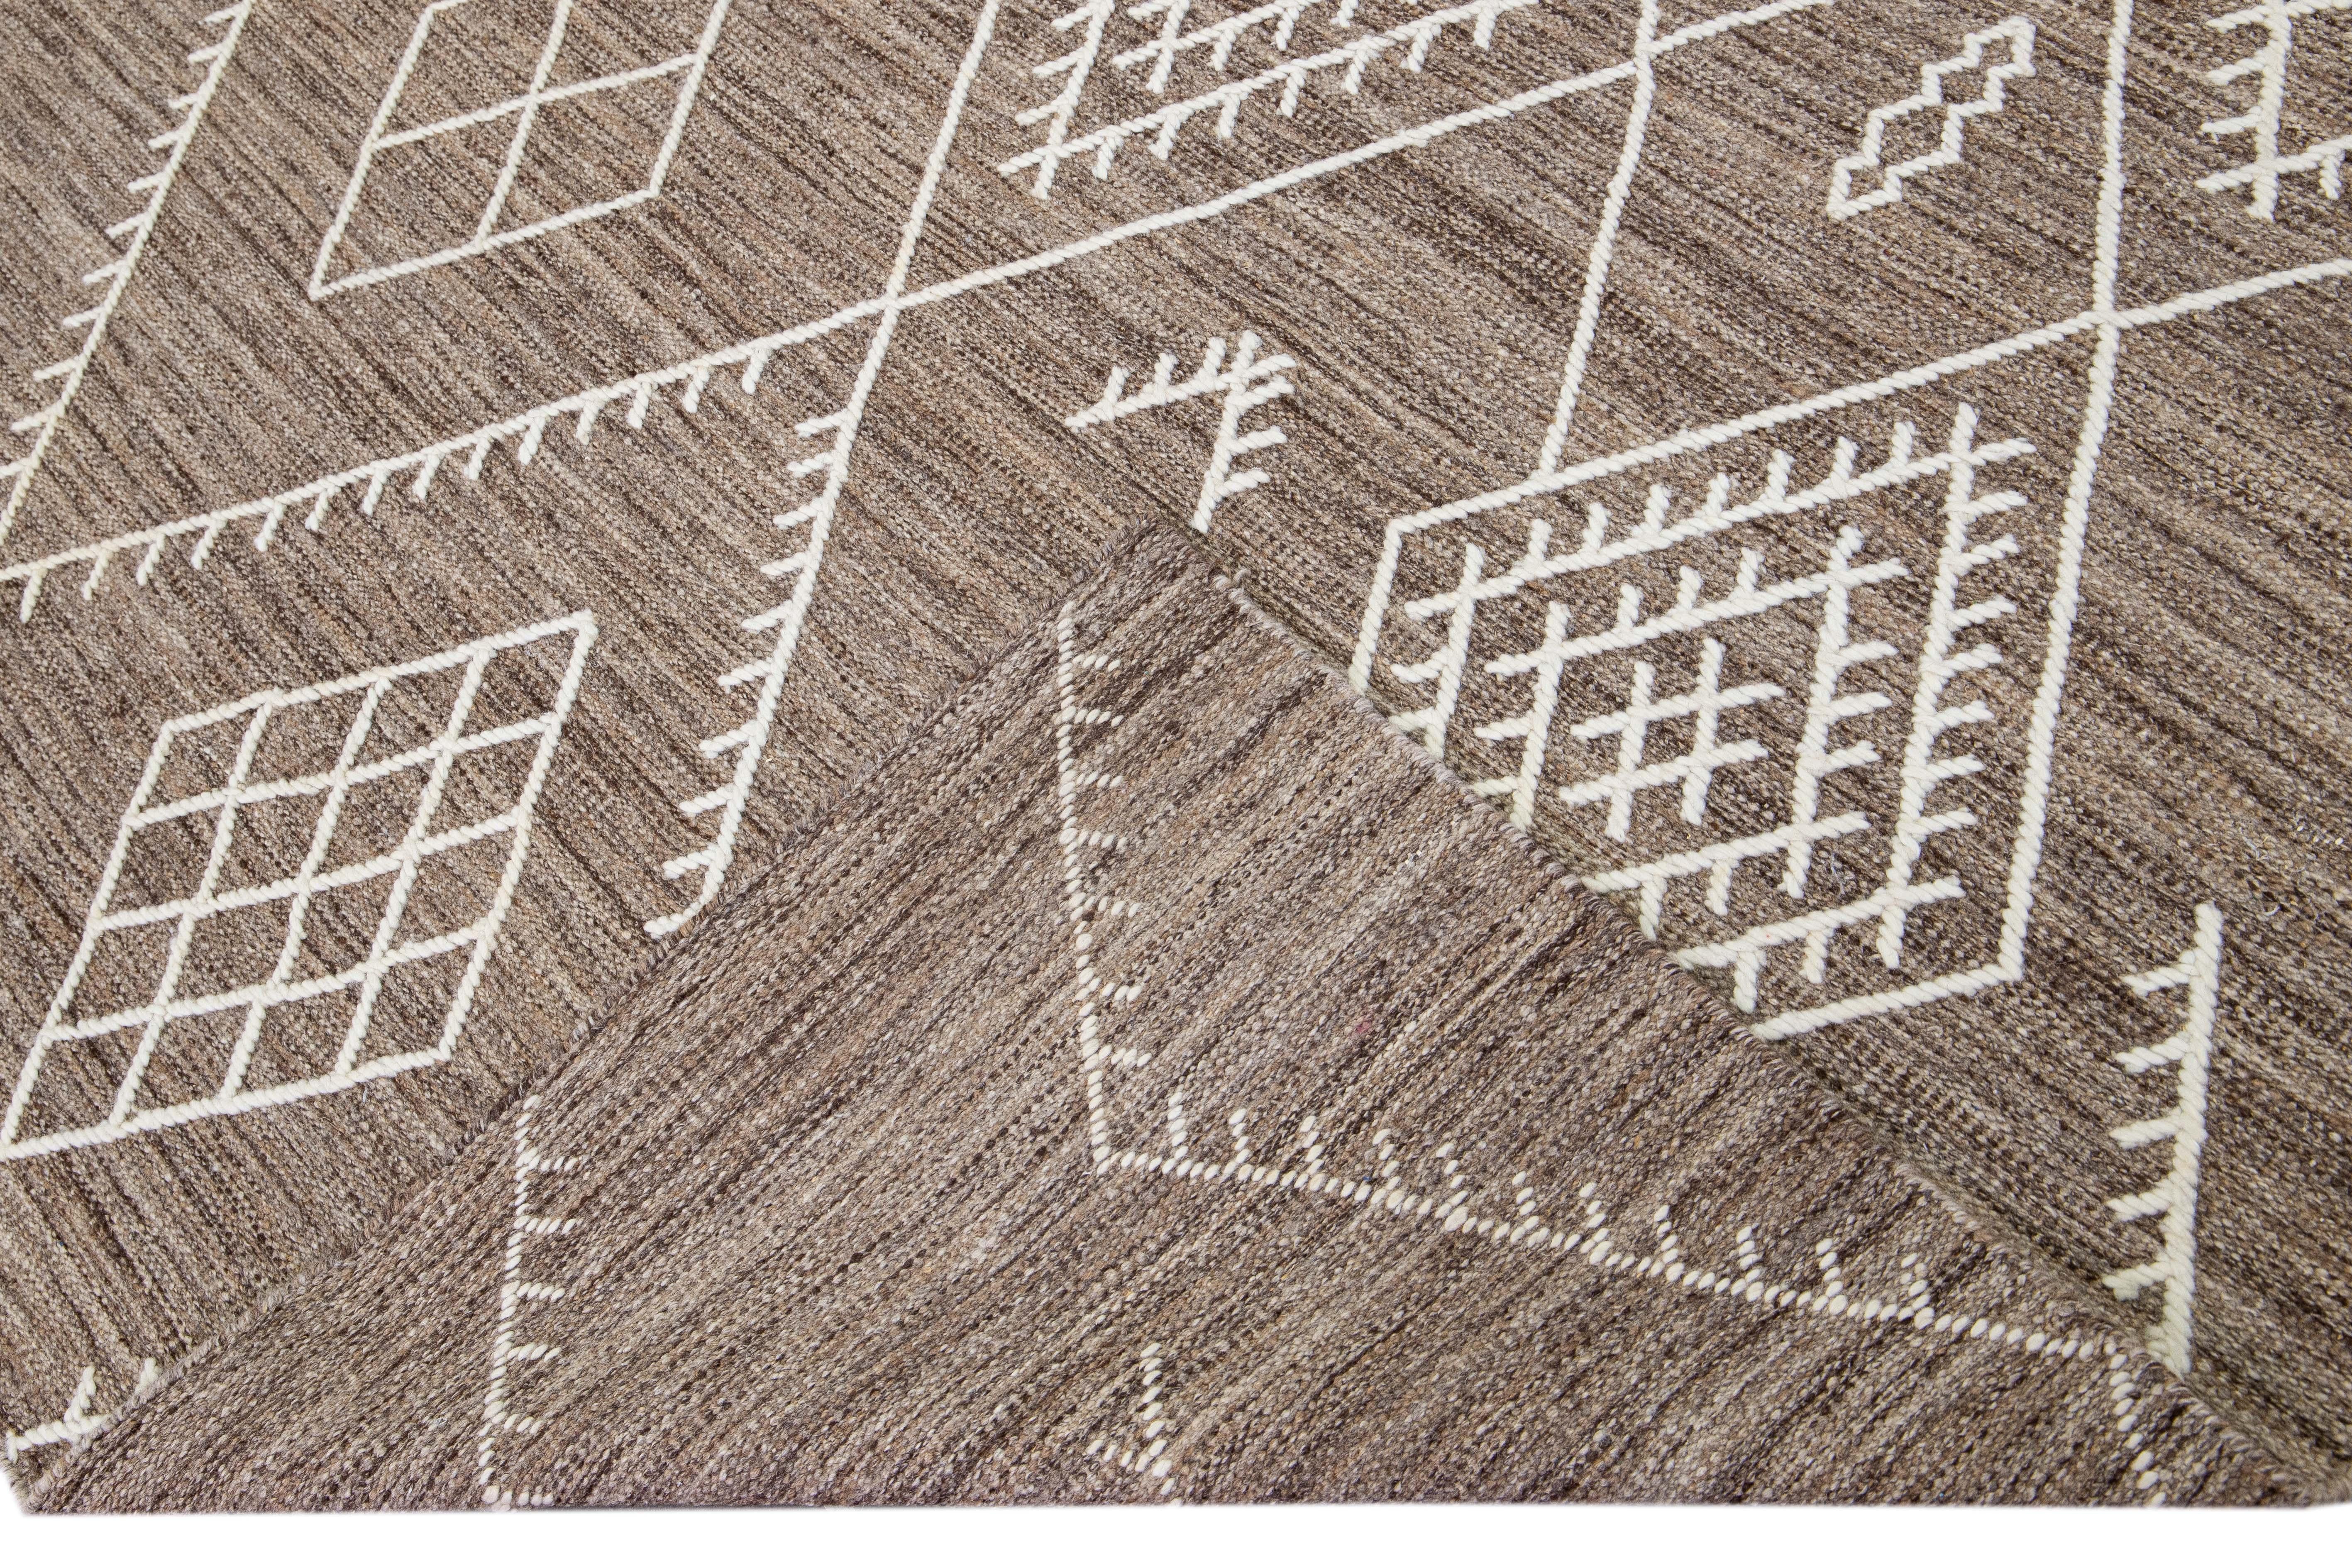 Beautiful kilim handmade wool rug with a brown field. This custom modern flatweave rug part of our Nantucket collection has ivory accents and features a gorgeous all-over geometric coastal design.

This rug measures: 9' x 12'.

Our rugs are